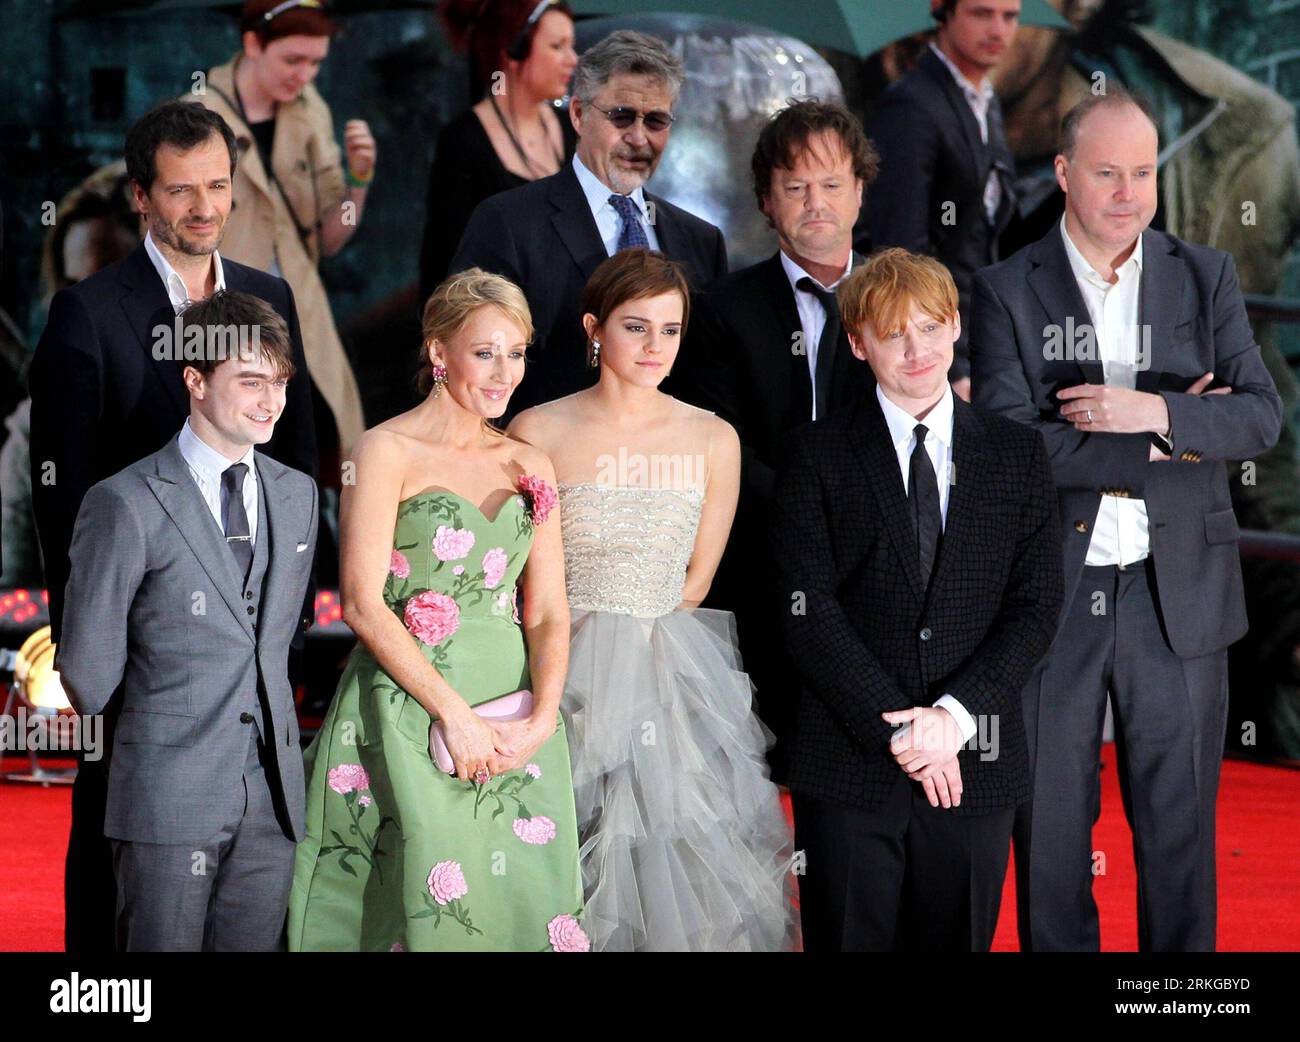 110707 -- LONDON, July 7, 2011 Xinhua -- L to R Producer David Heyman, actor Daniel Radcliffe, author J.K. Rowling, actress Emma Watson, screenwriter Steve Kloves, actor Rupert Grint and director David Yates pose pose during the global premiere of Harry Potter and The Deathly Hallows: Part 2, the last film of the series, at Trafalgar Square in London, Britain, July 7, 2011. Xinhua/Yang Xiaohan UK-LONDON-HARRY POTTER-PREMIER PUBLICATIONxNOTxINxCHN Stock Photo